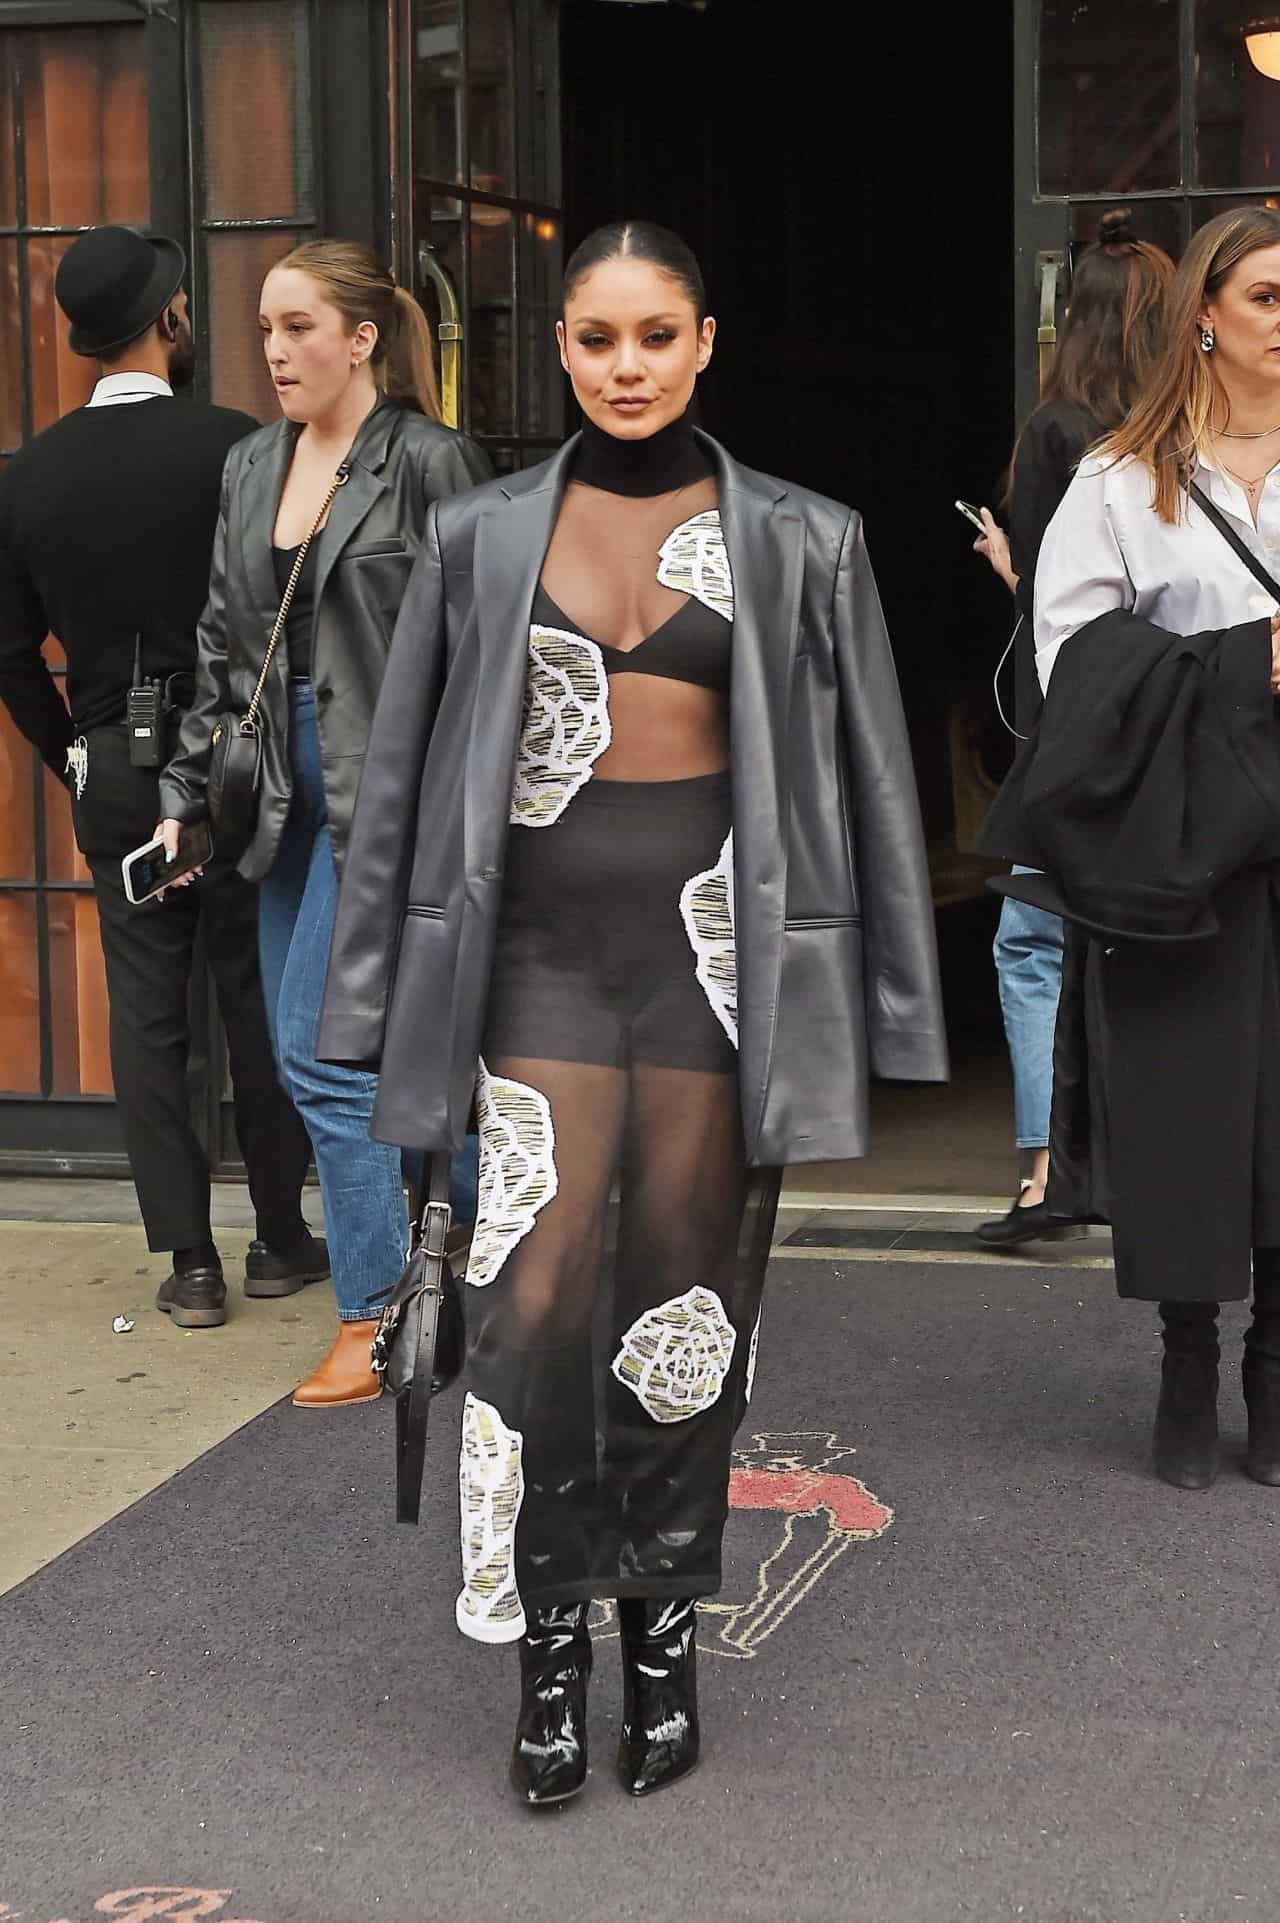 Vanessa Hudgens Steps Out in Style for "Dead Hot" Promotion in NY